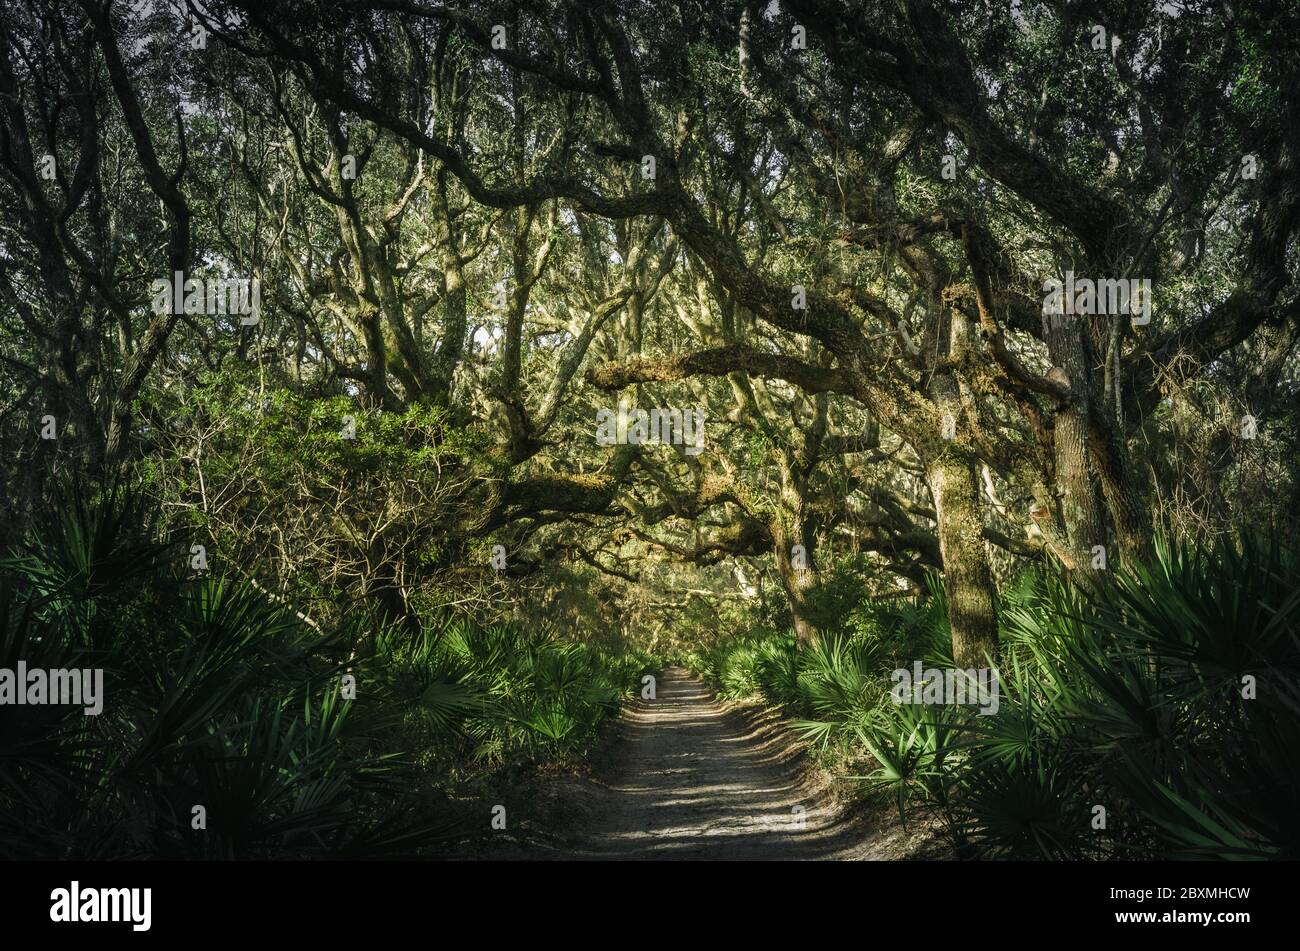 Cumberland Island has one of the largest maritime forests remaining in the United States. High winds, salt spray, and sandy soil provide a harsh envir Stock Photo